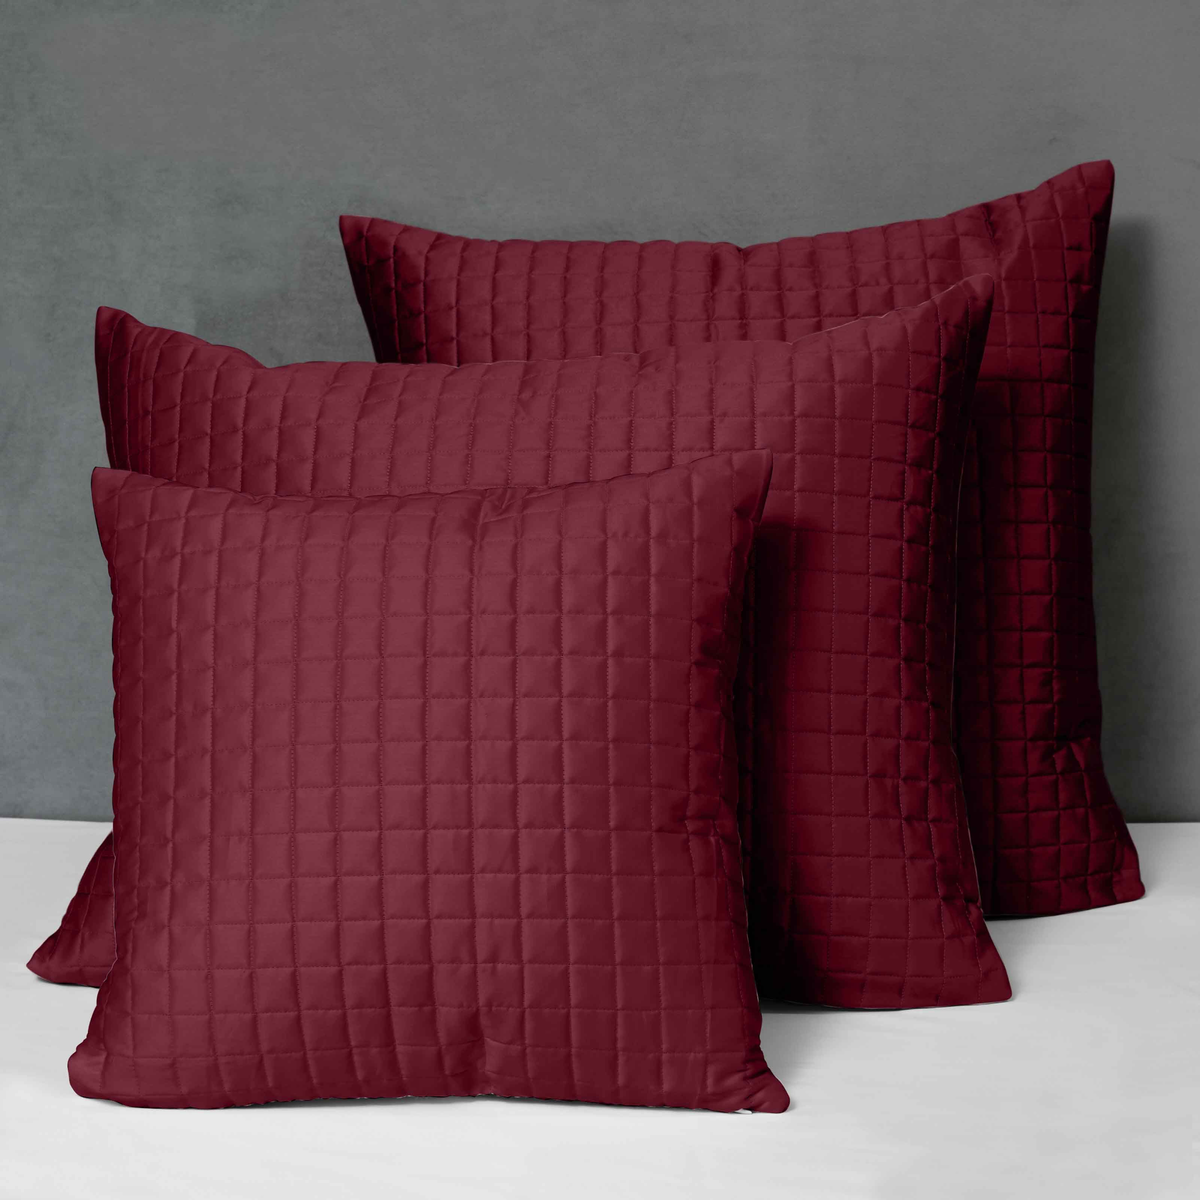 Different Sizes of Quilted Shams of Signoria Masaccio Bedding in Cardinale Red Color